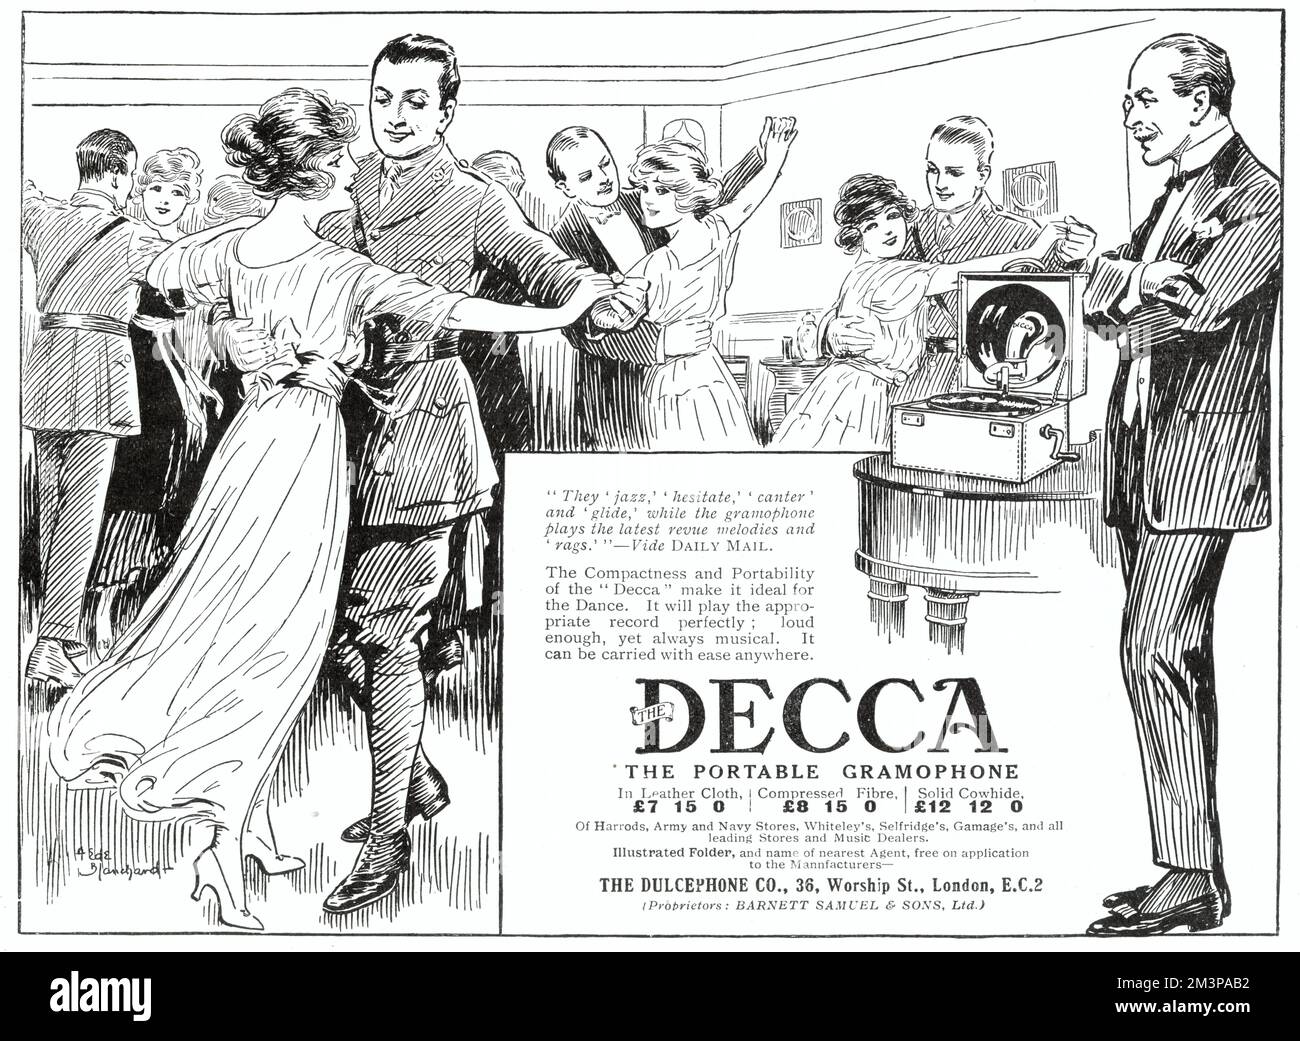 Advertisement for the Decca gramophone, showing a jolly party with some men in khaki uniform and some in evening dress dancing with girls.  Throughout the war, Decca gramophone adverts depicted life in the trenches (and the joy brought there by their music).  In this post-war advert, published in February 1919, the mood is joyful and optimistic. Stock Photo